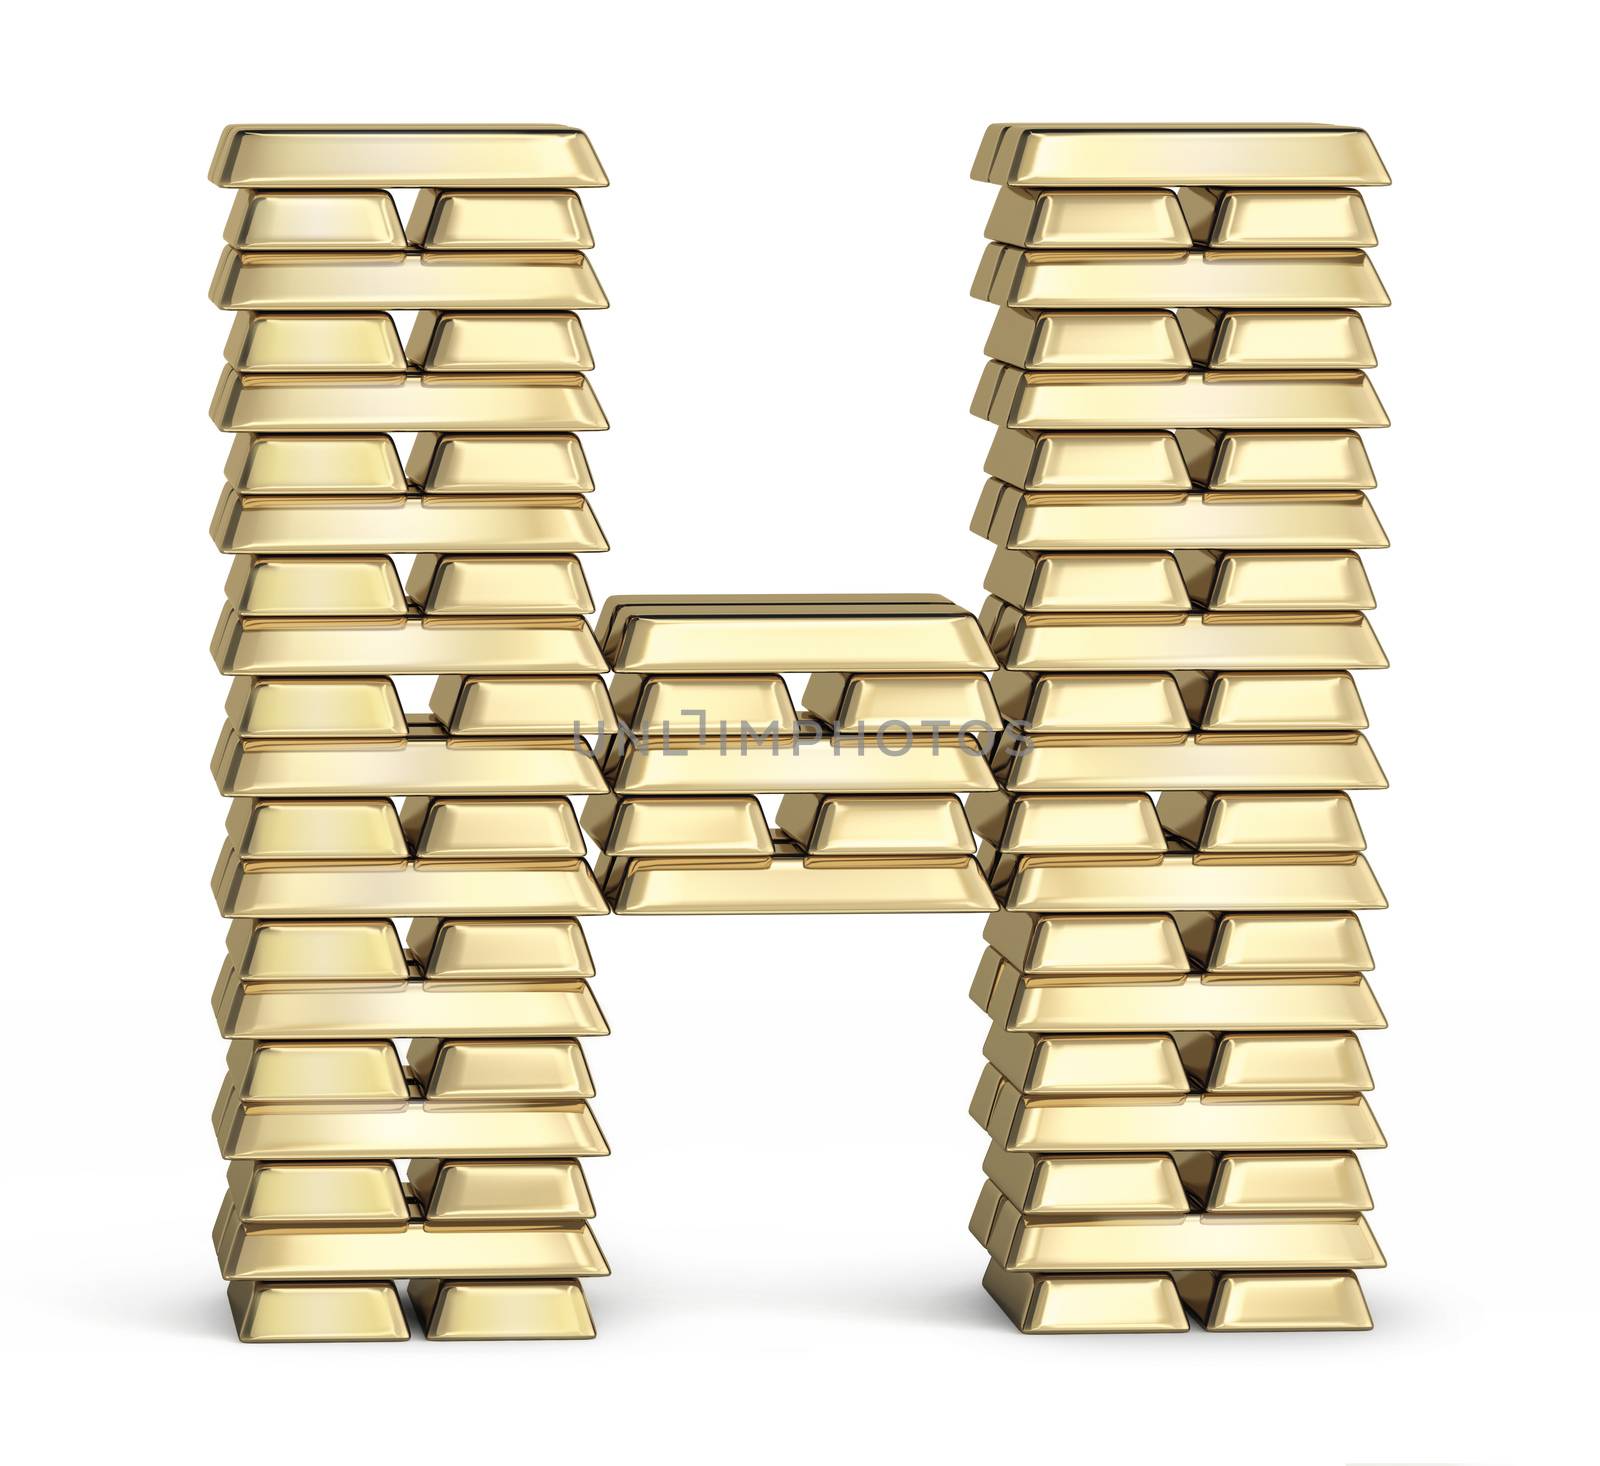 Letter H from stacked gold bars on white background